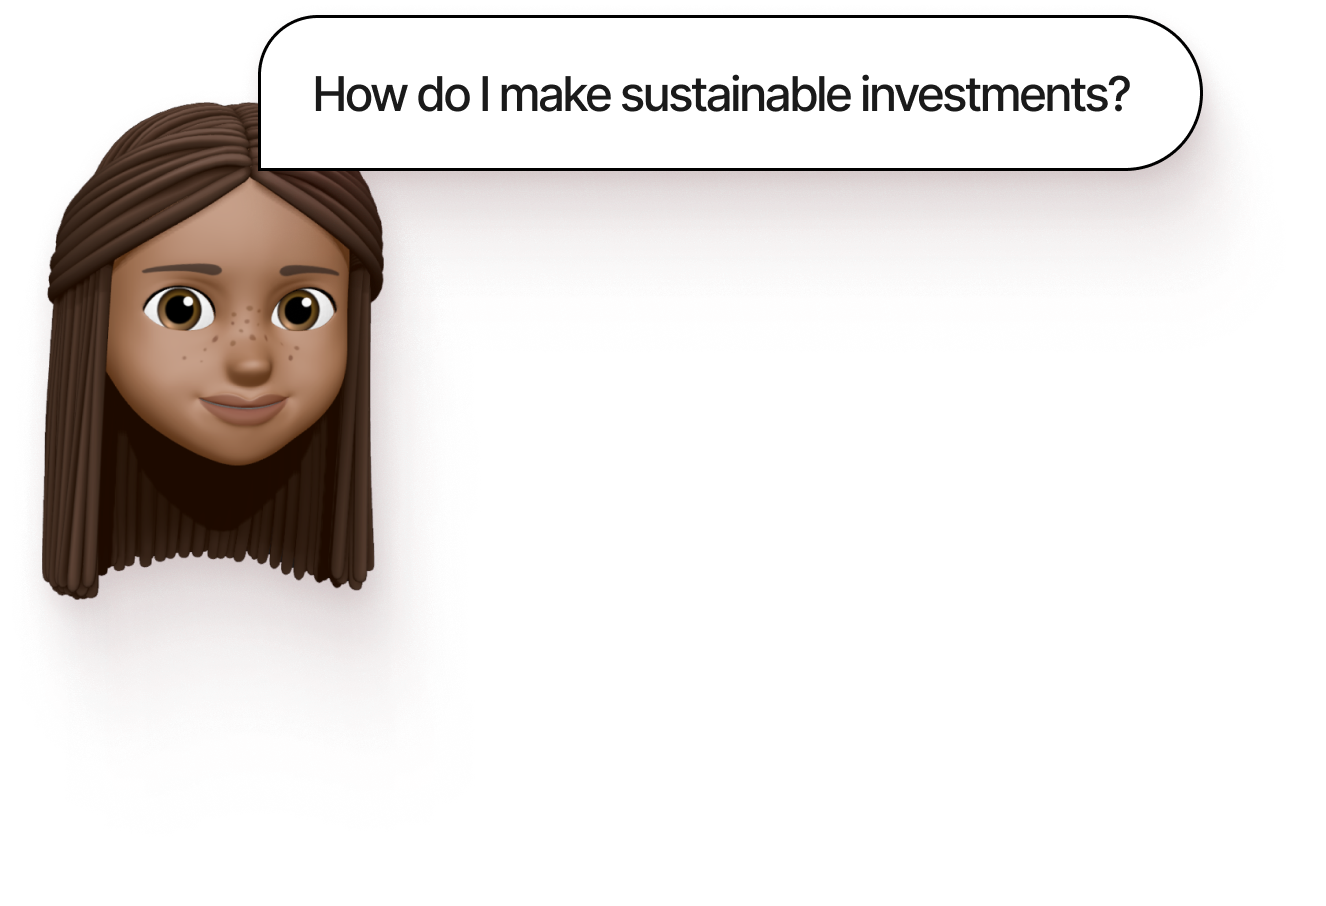 How do I make sustainable investments?